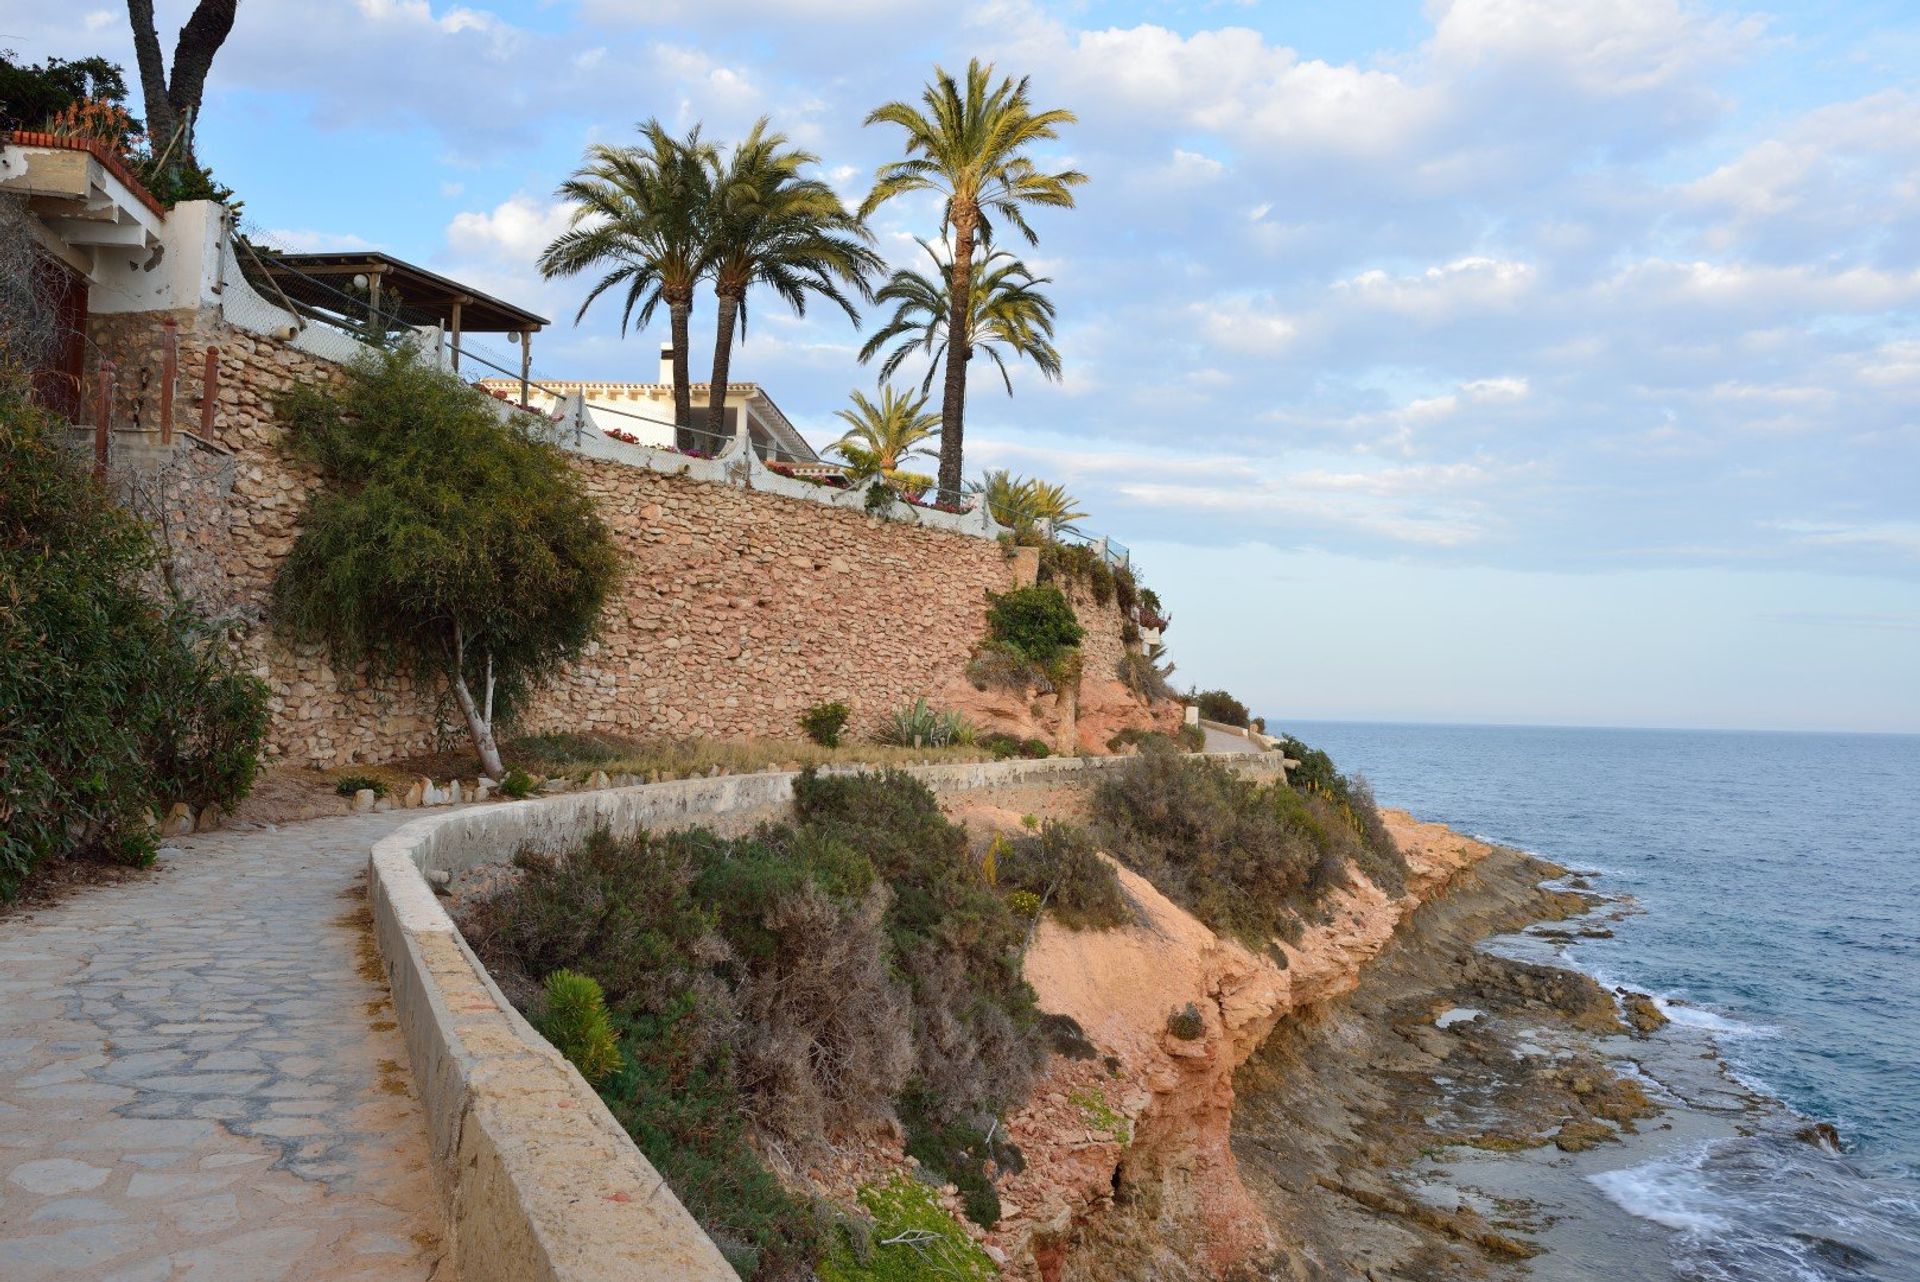 Cabo Roig's promenade between Cabo Roig beach and Dehesa de Campoamor, offers the perfect afternoon coastal walk